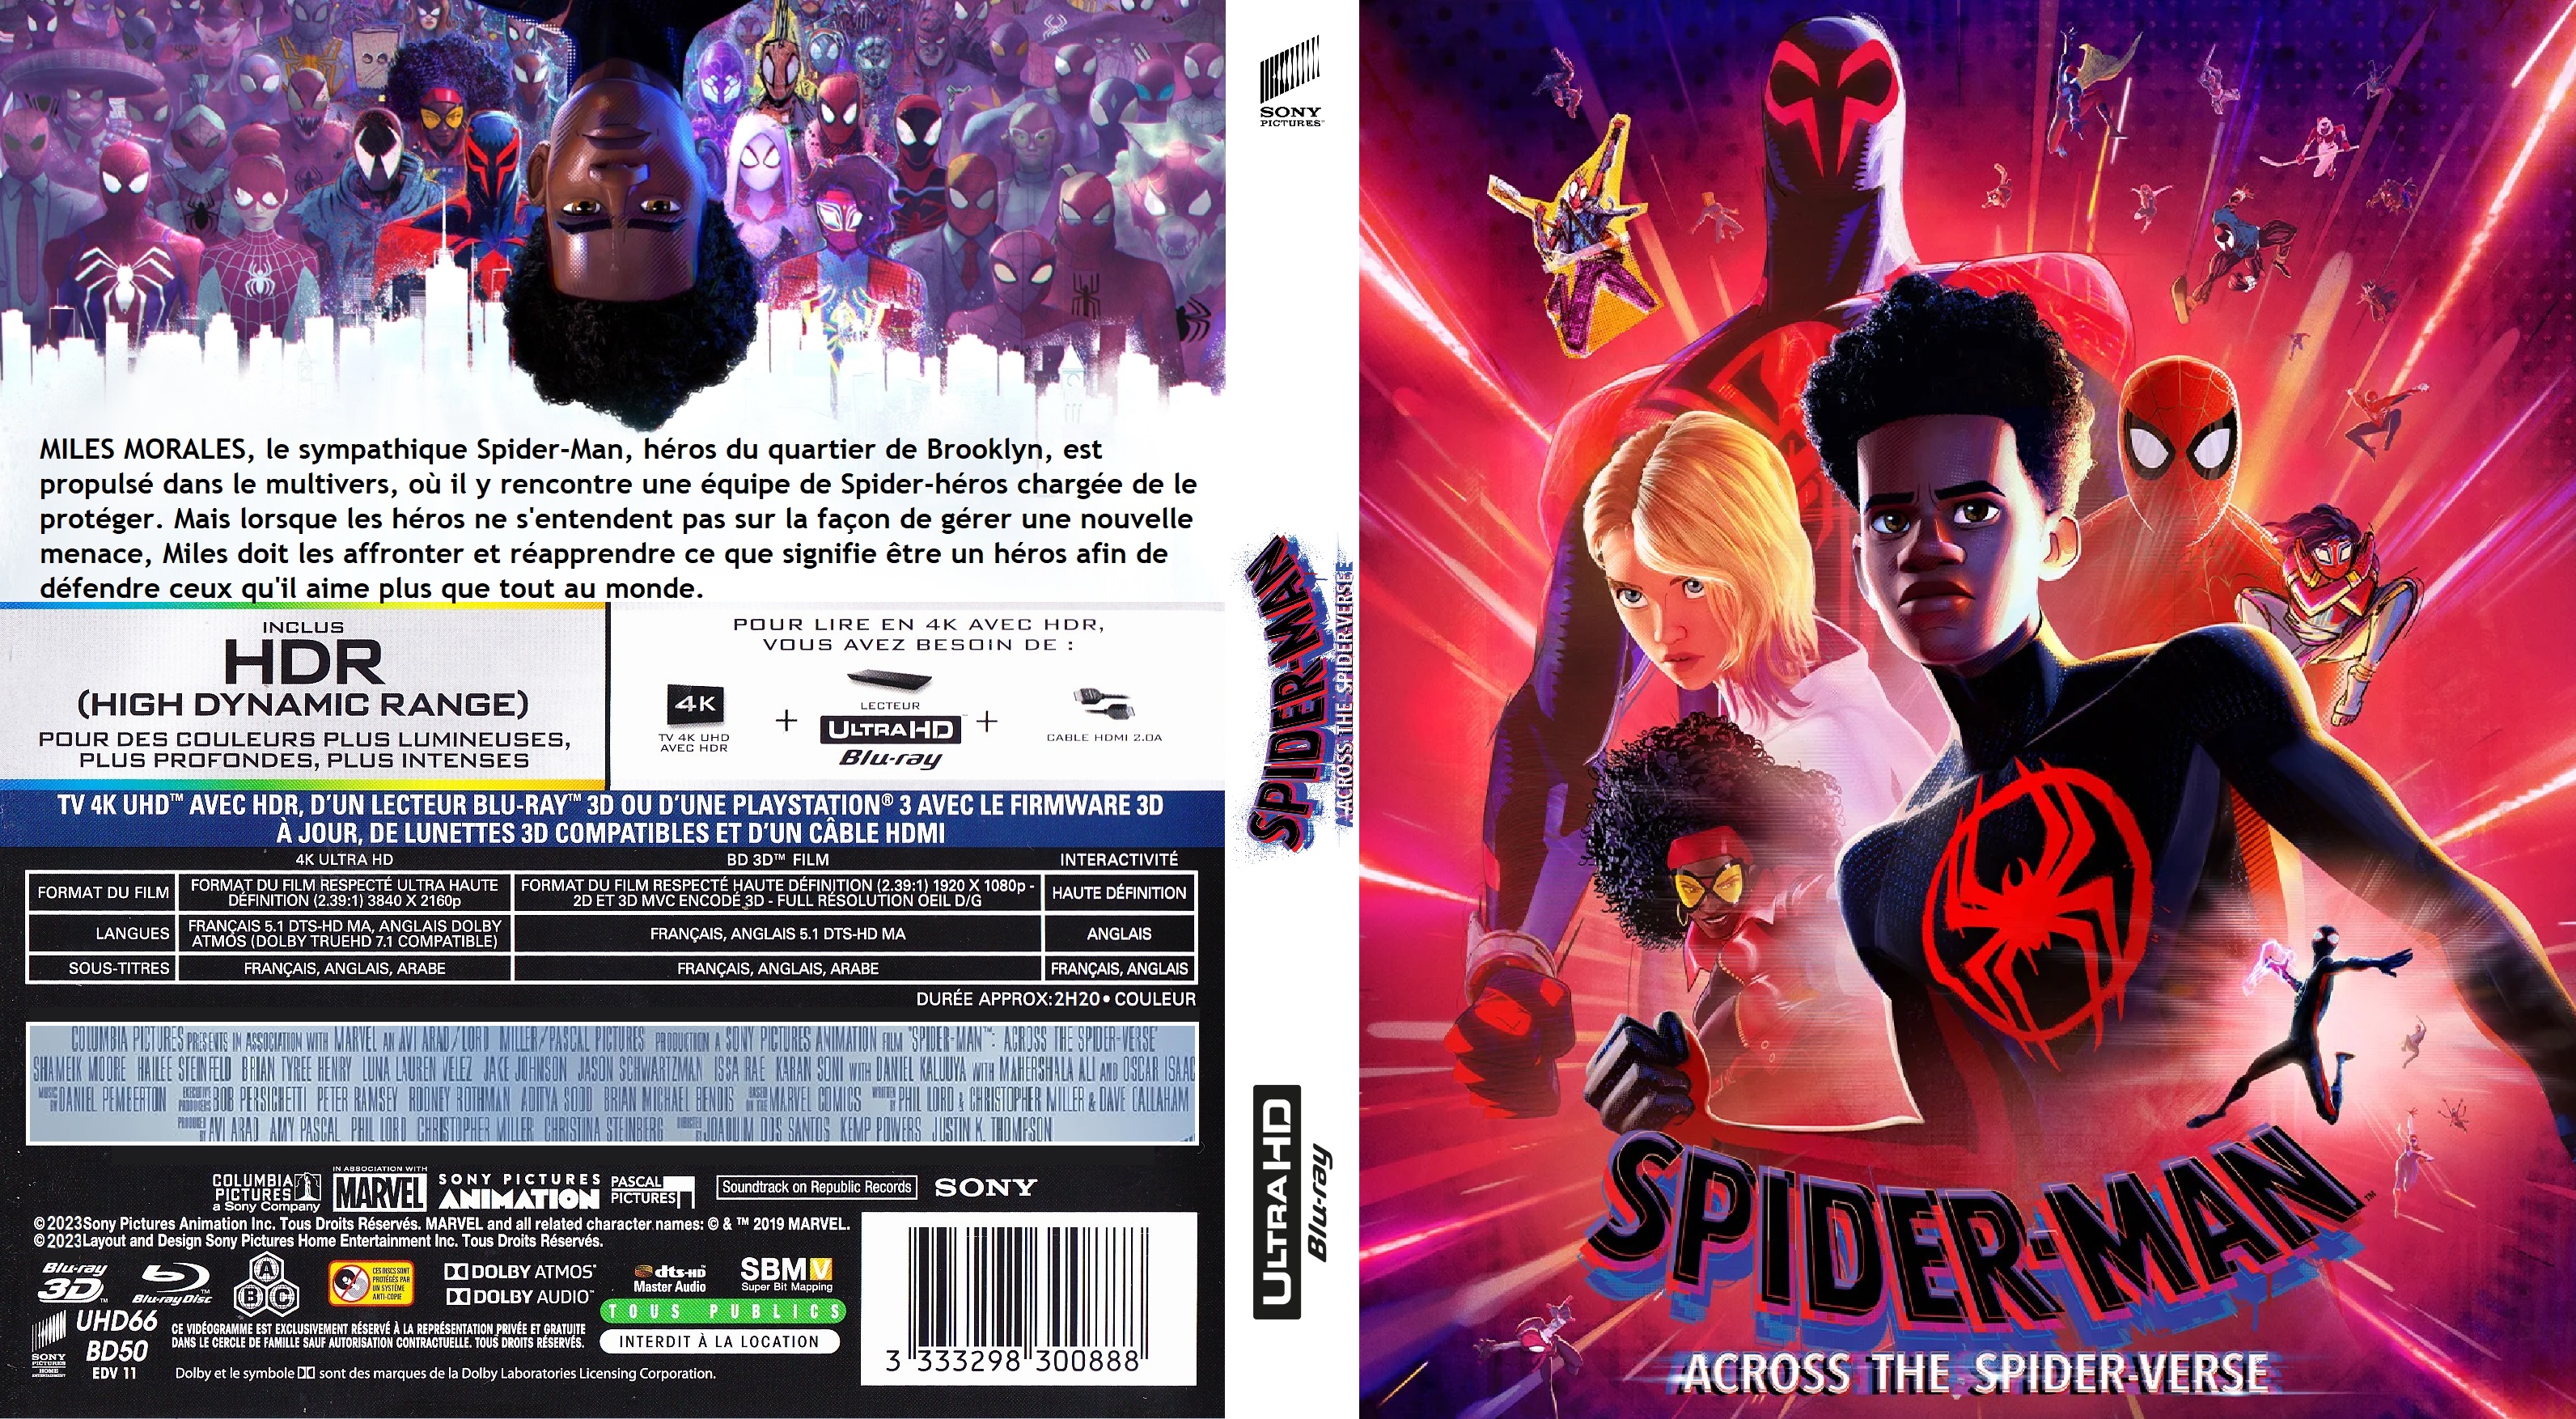 Jaquette DVD Spider-man Accross the Spider-verse  BLU RAY 4K custom